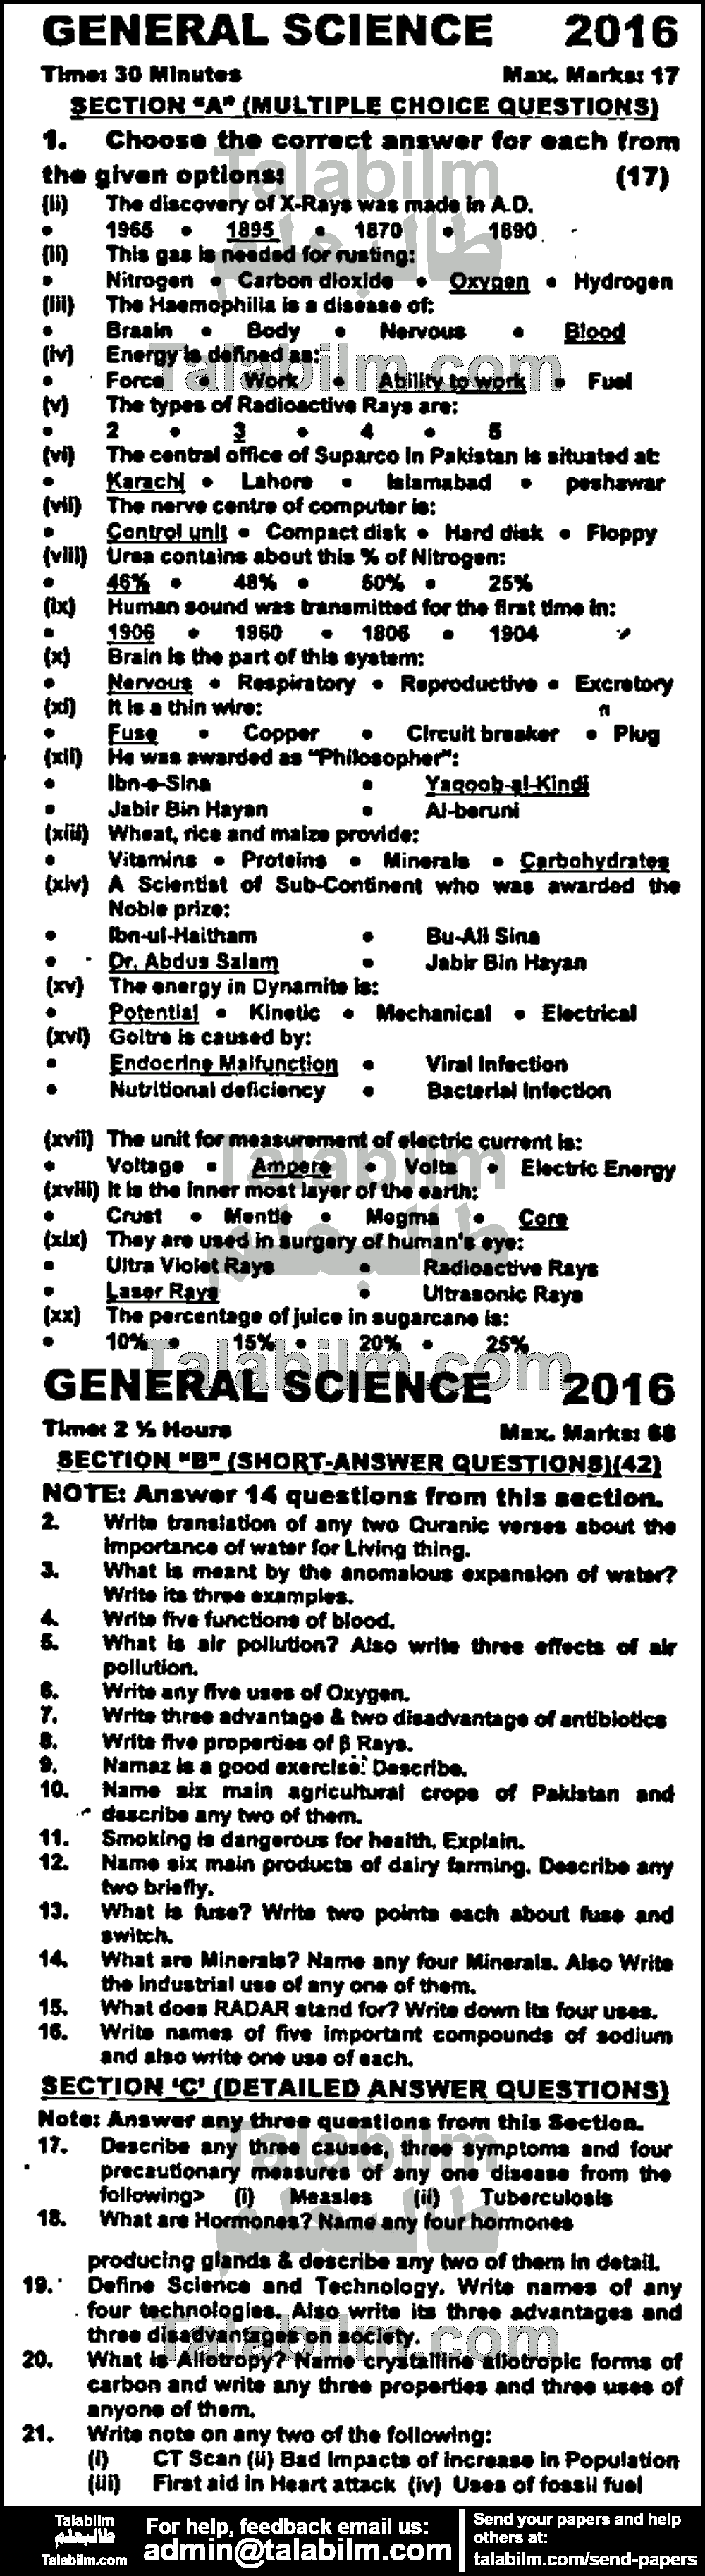 General Science 0 past paper for English Medium 2016 Group-I